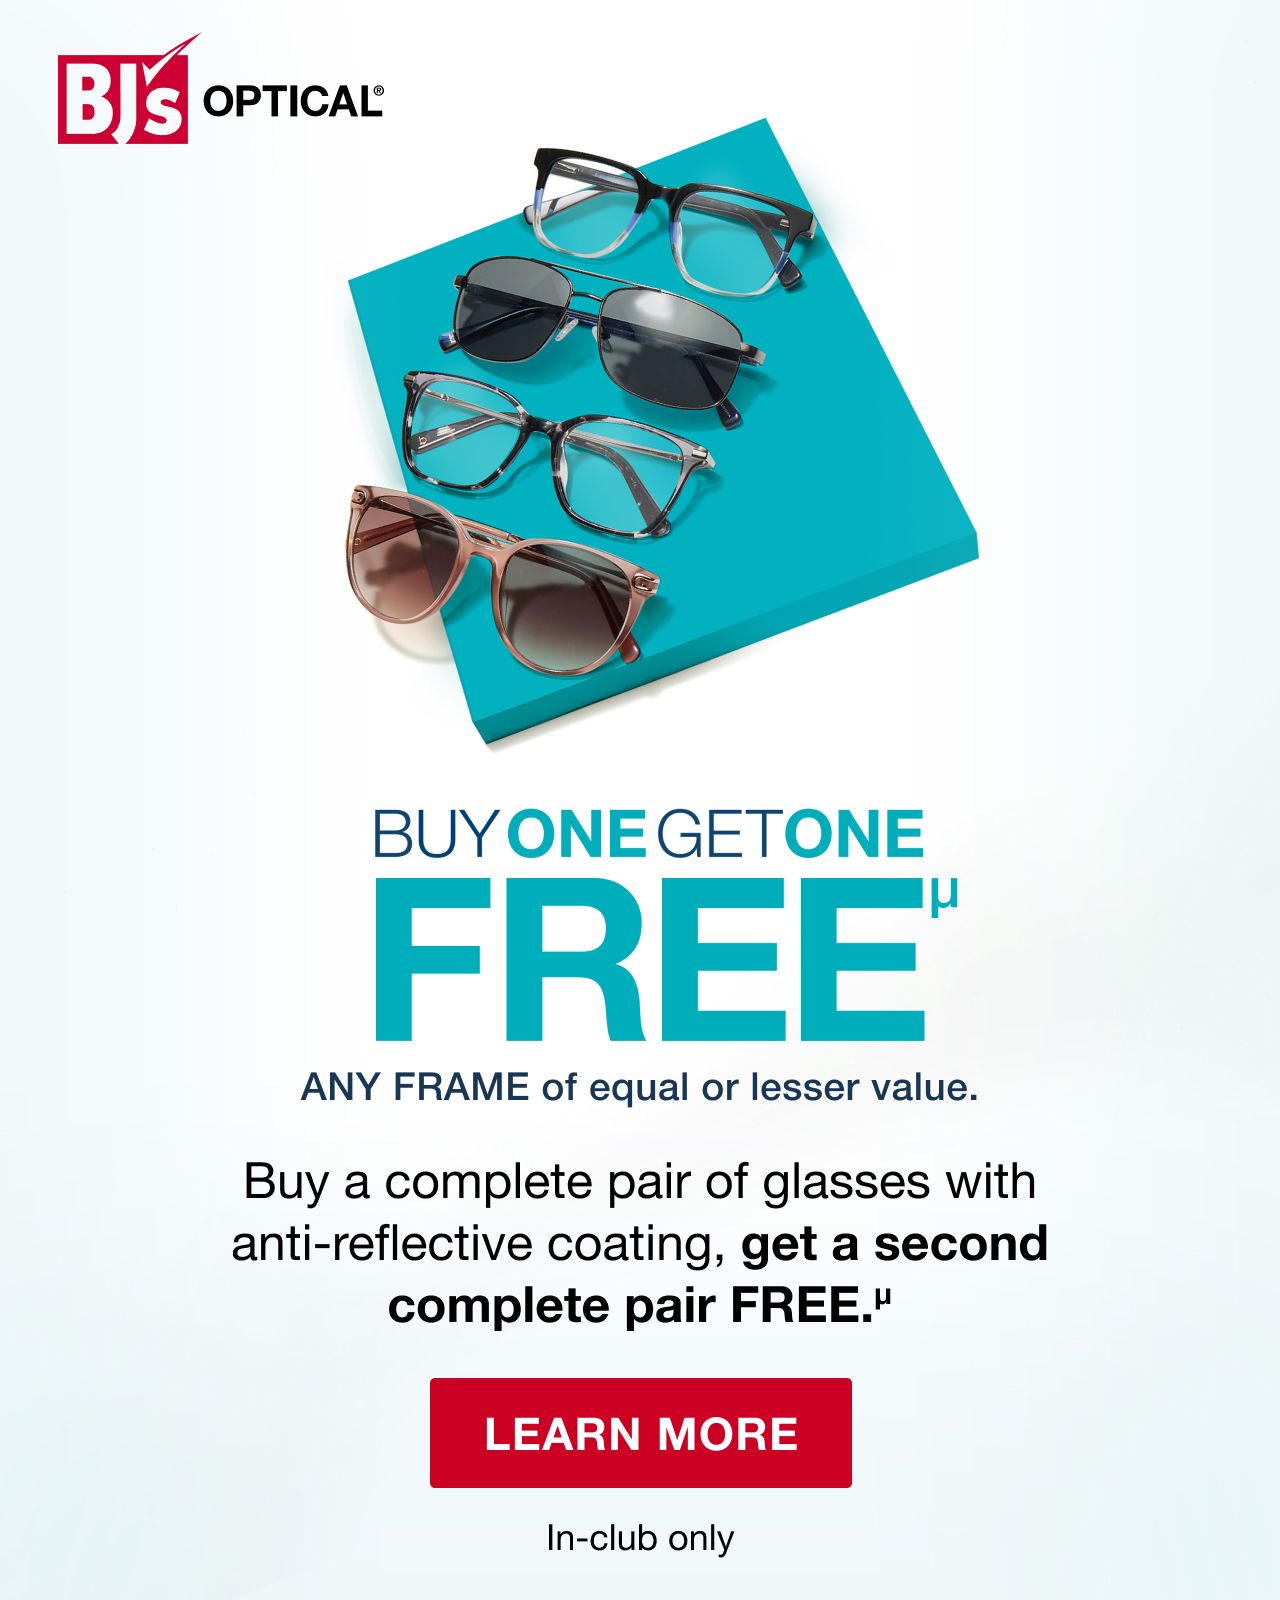 BJ's Optical®. Buy One, get one free. In-club only. Click here to learn more